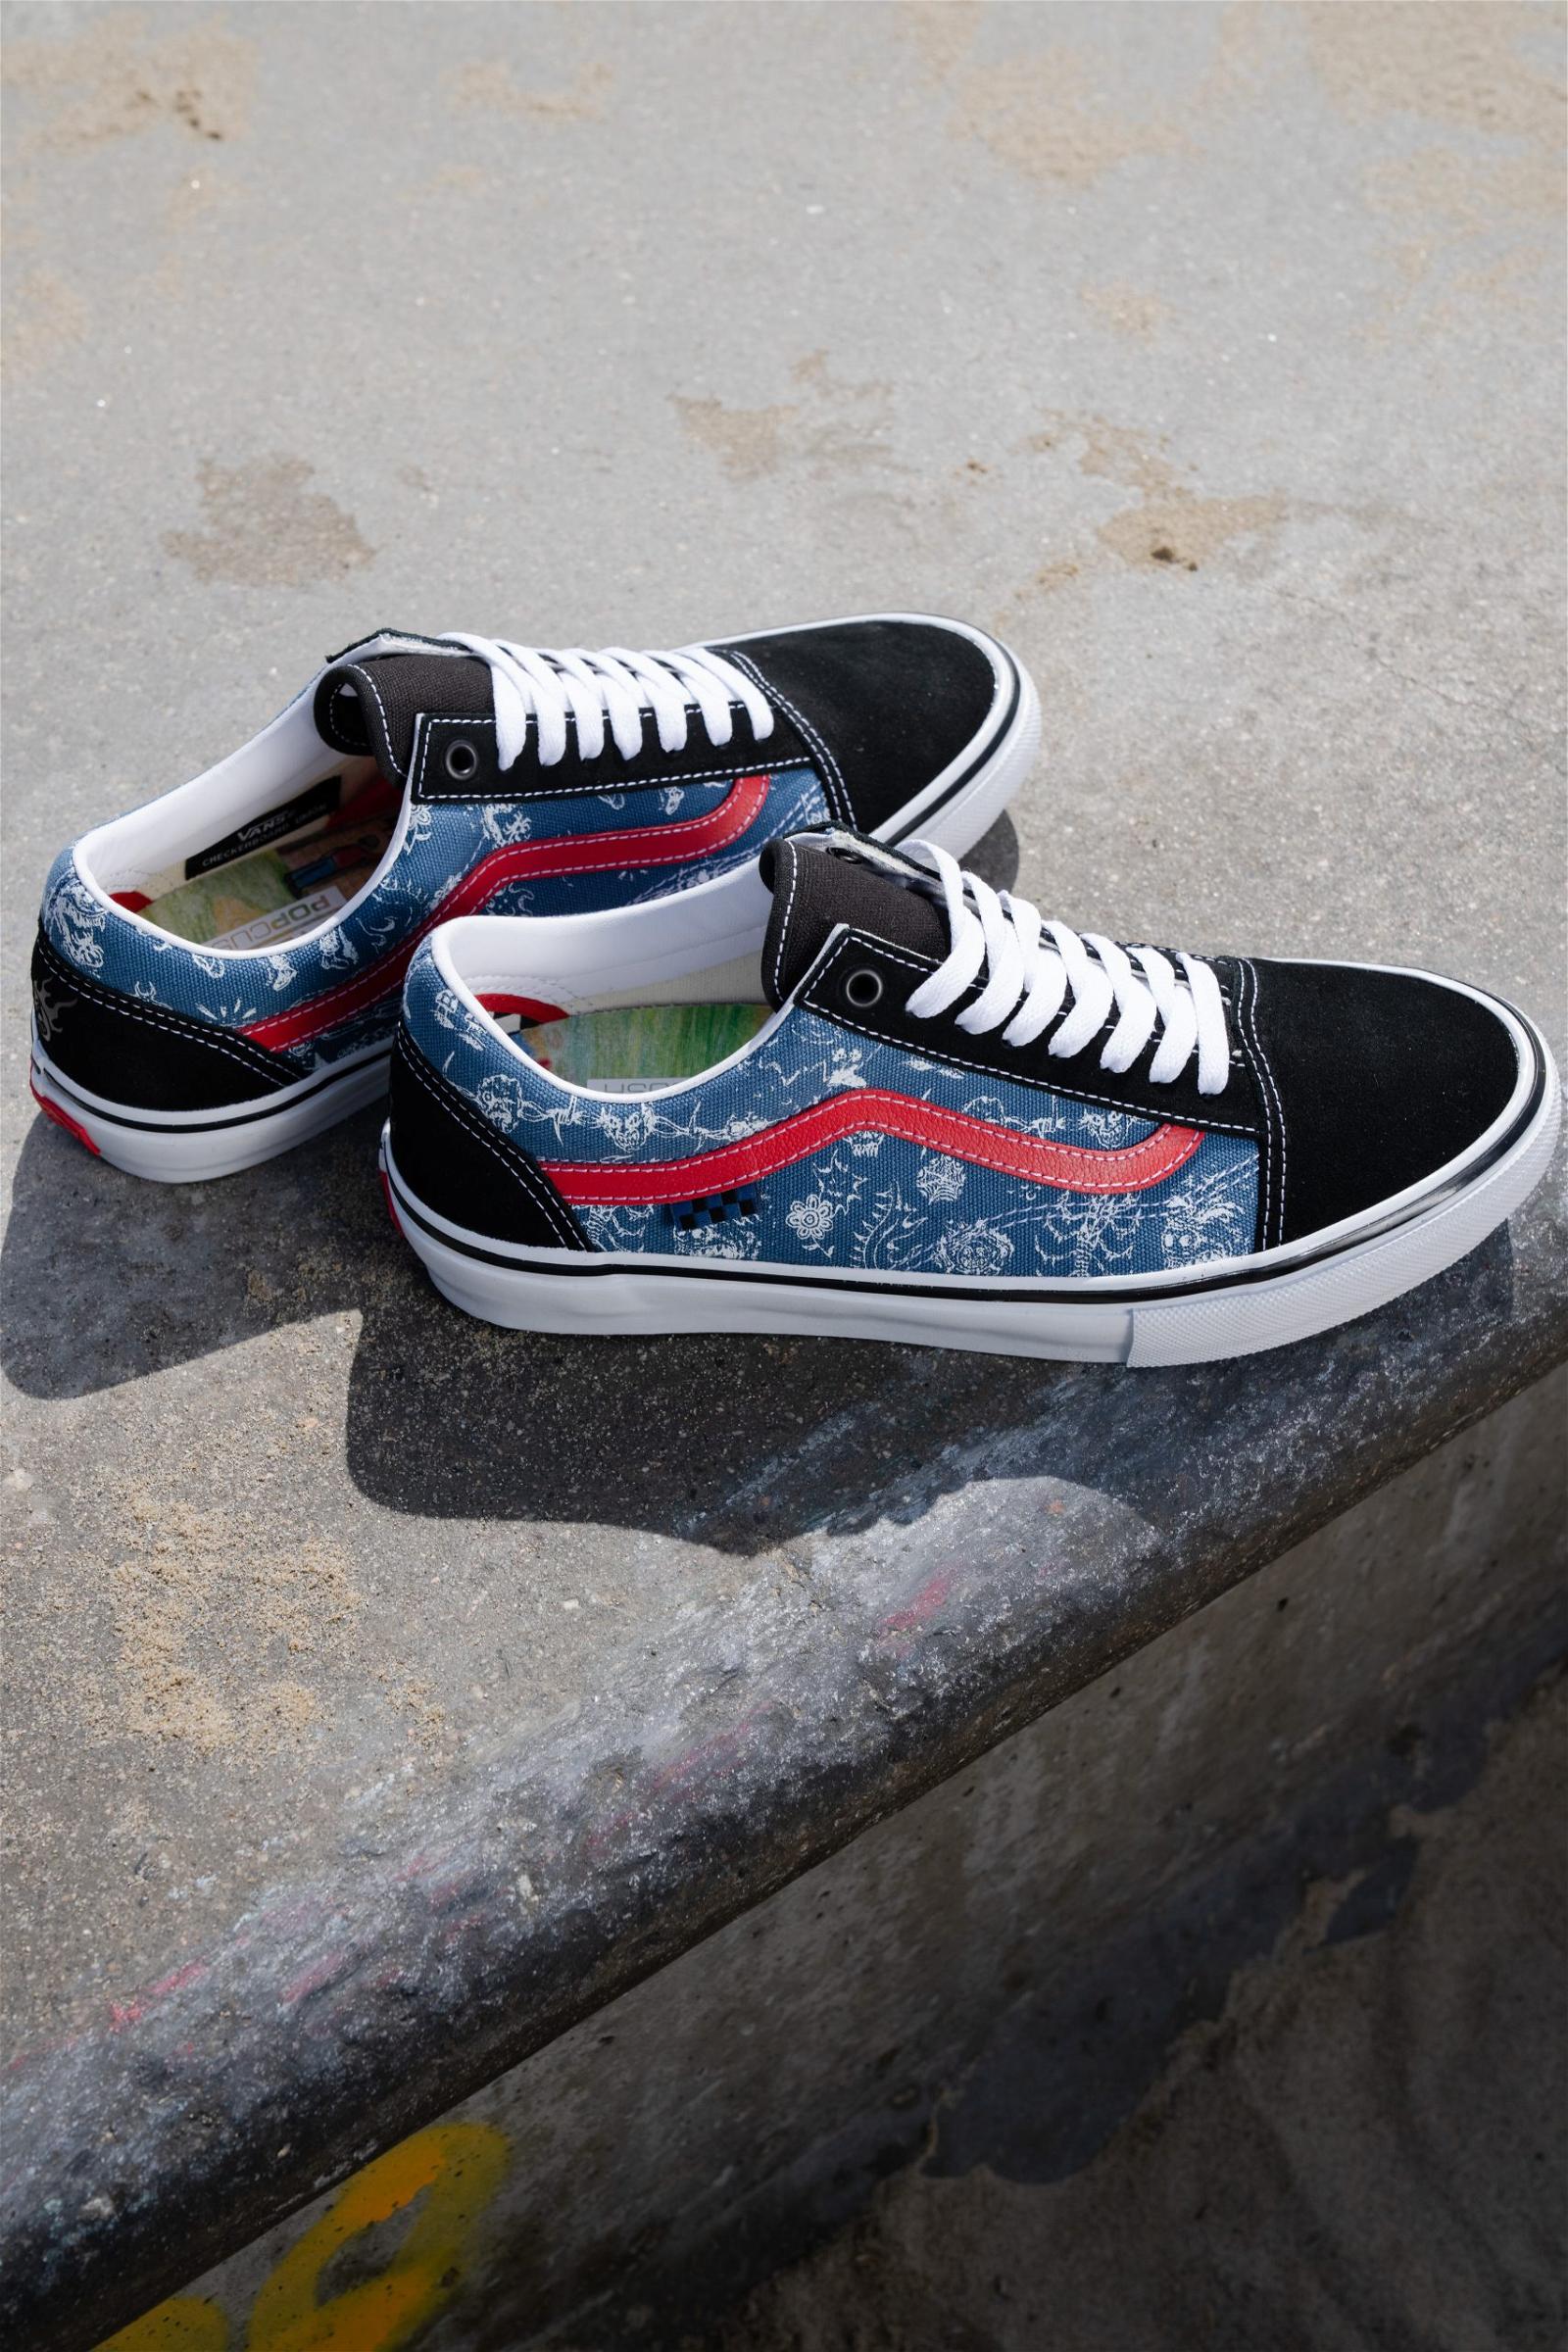 Vans x Mike Gigliotti collection